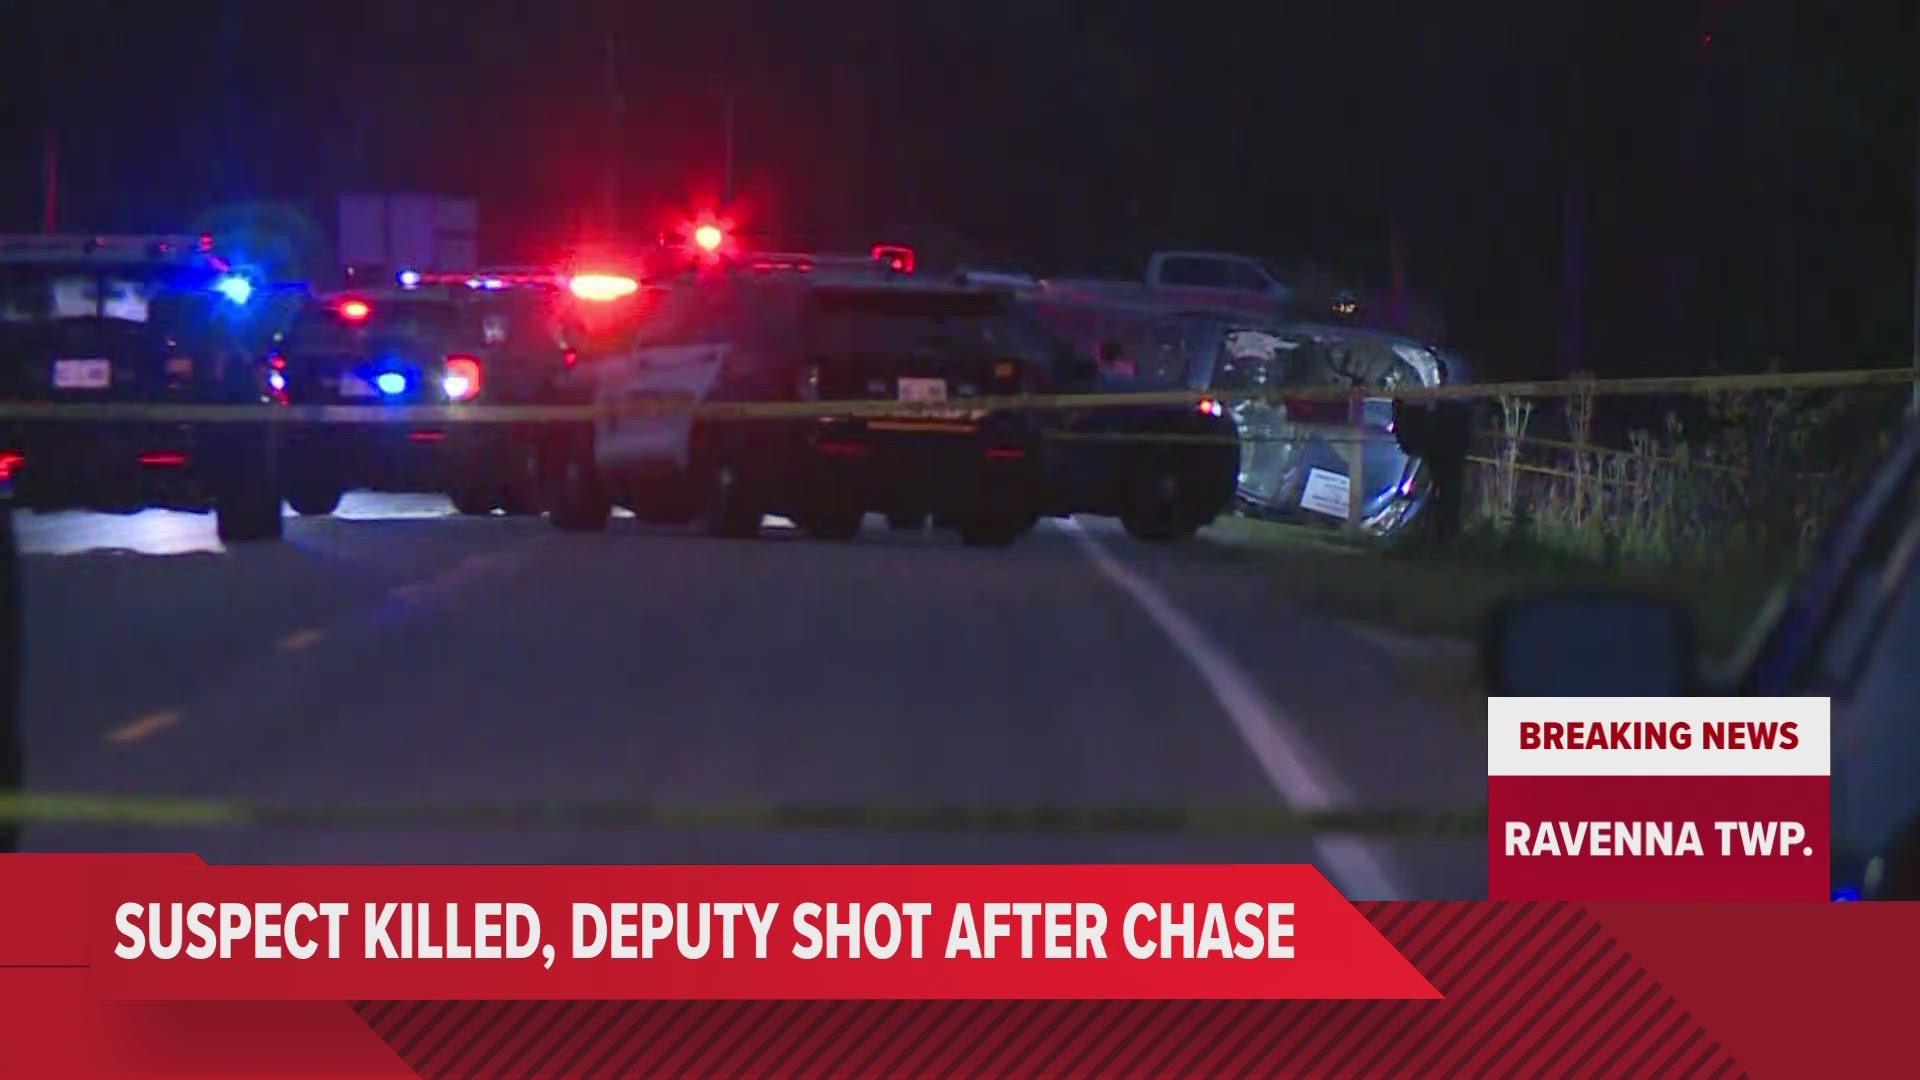 The sheriff says deputies attempted to take the suspect into custody at gunpoint when the suspect shot at deputies, who returned fire. The suspect was killed.